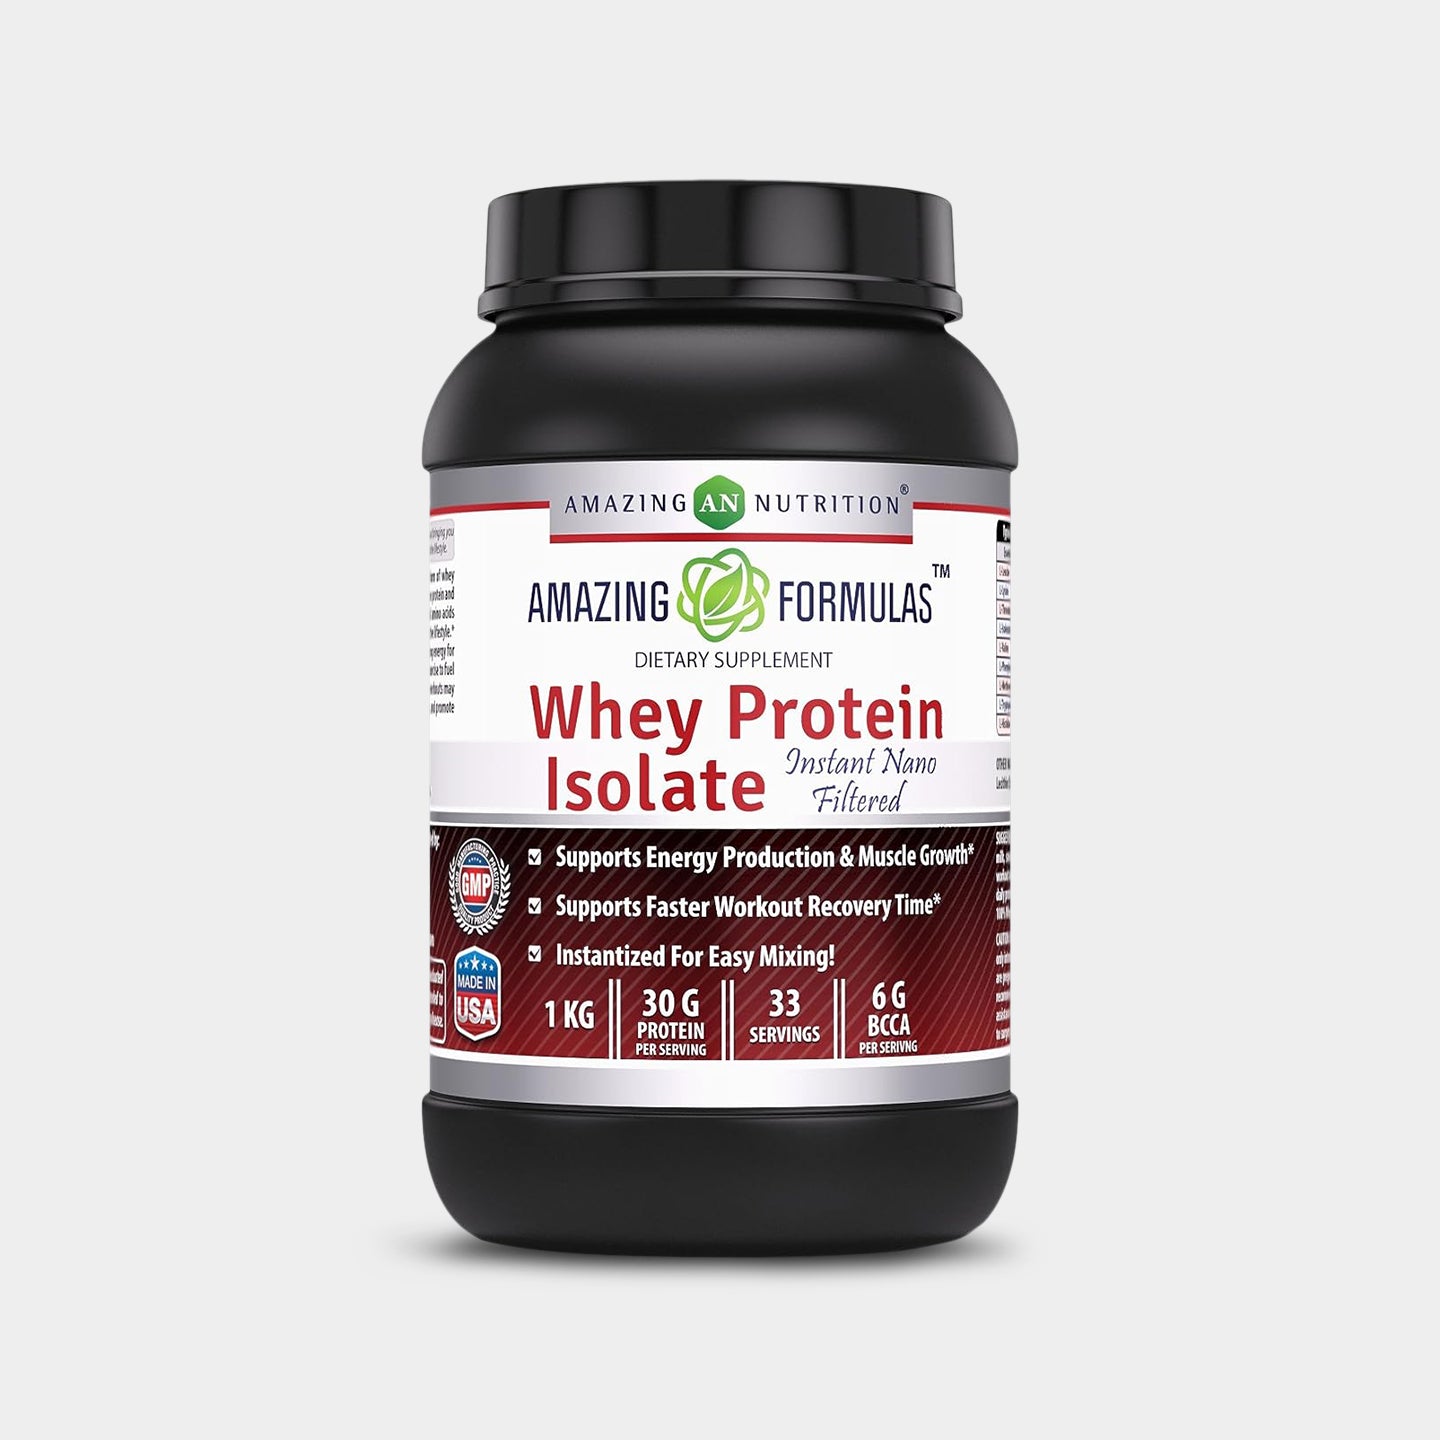 Amazing Formulas Whey Protein Isolate A1